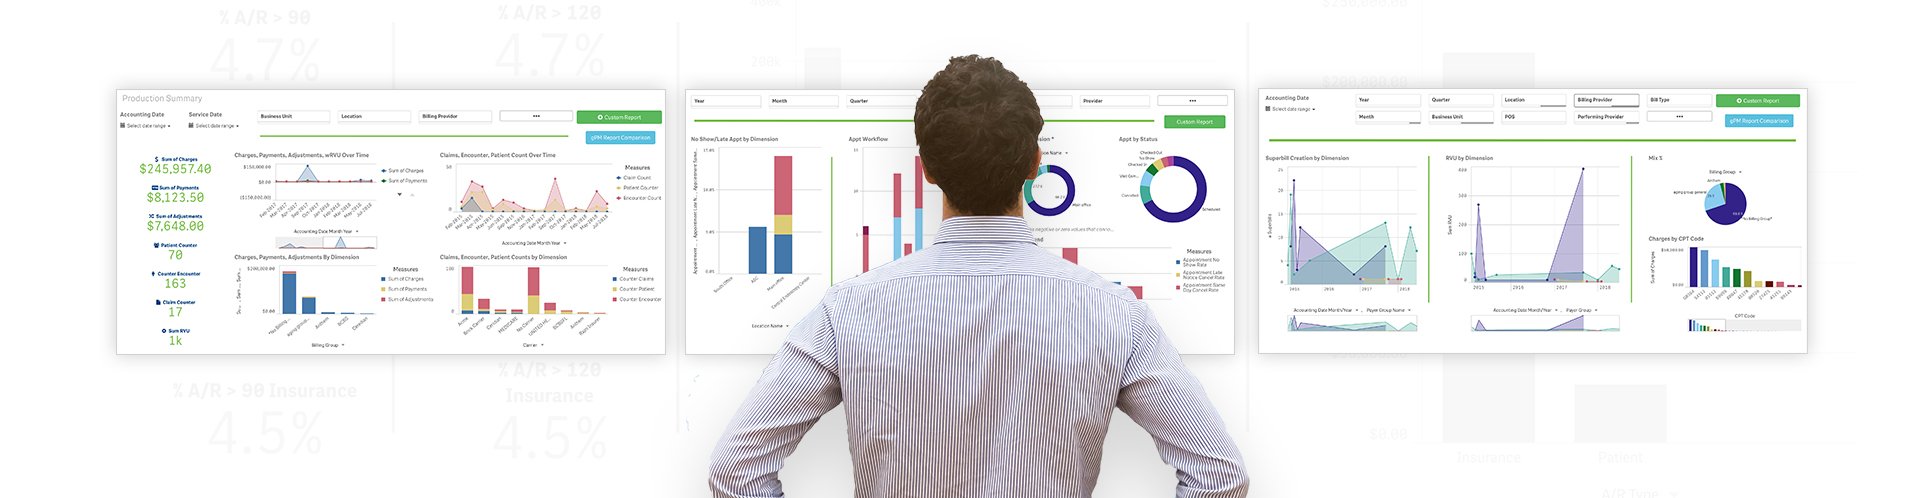 man standing with hands on hips in front of and looking at charts and graphs